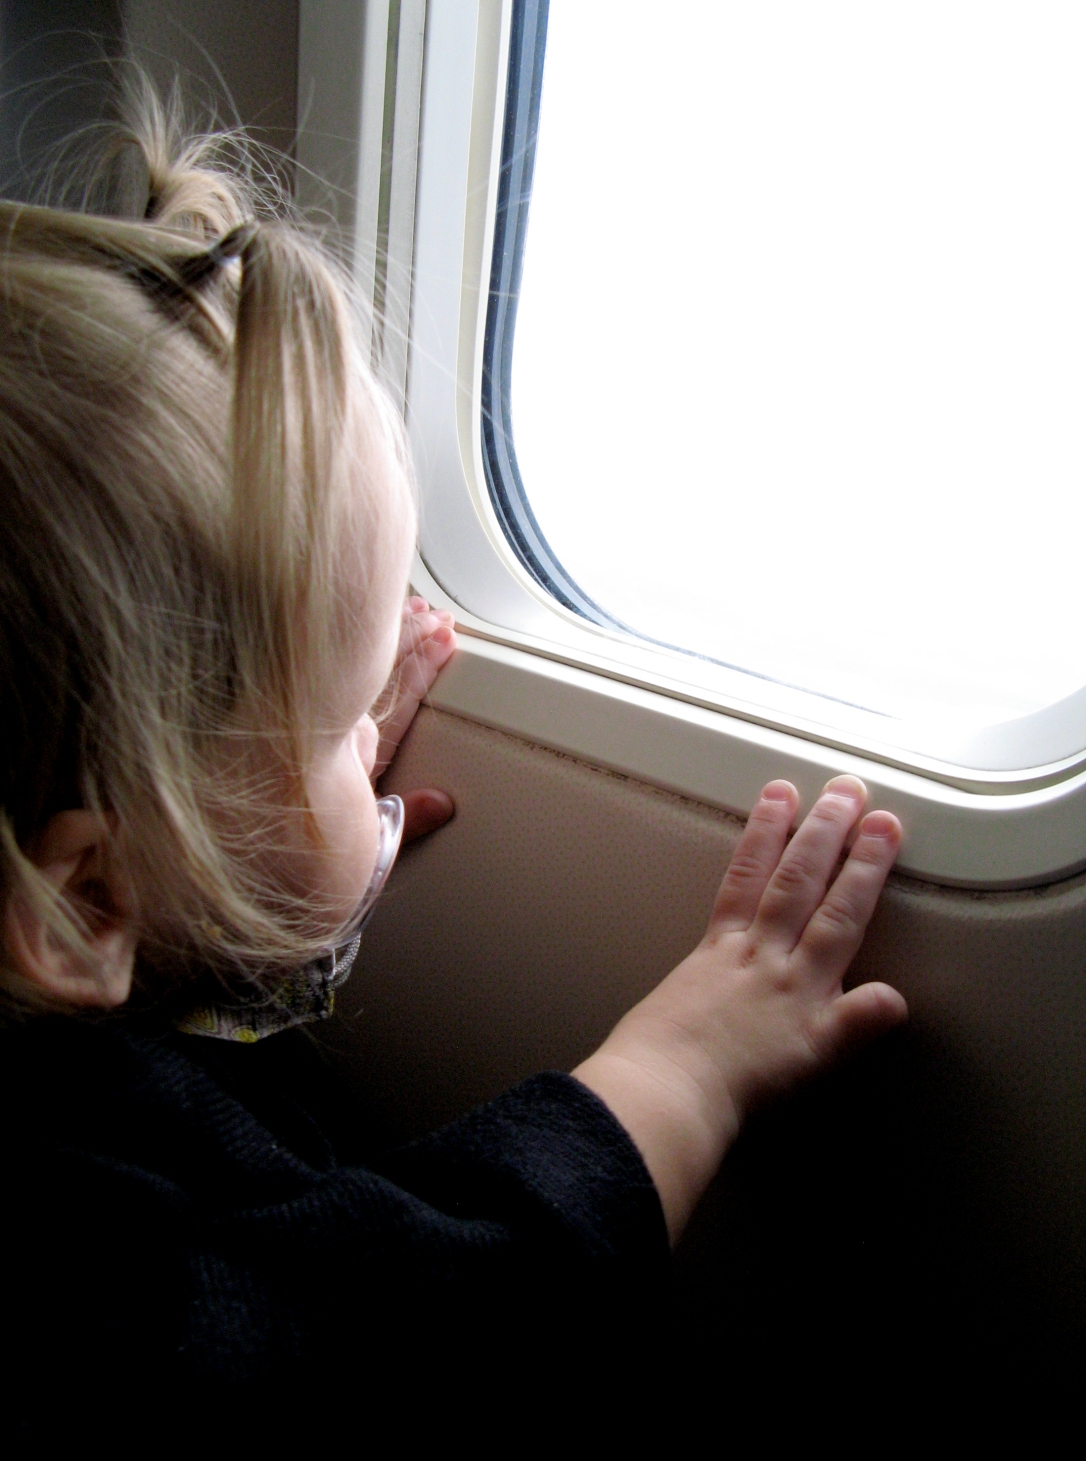 Toddler looking out airplane window - via the Oaxacaborn blog - photo by Gina Munsey